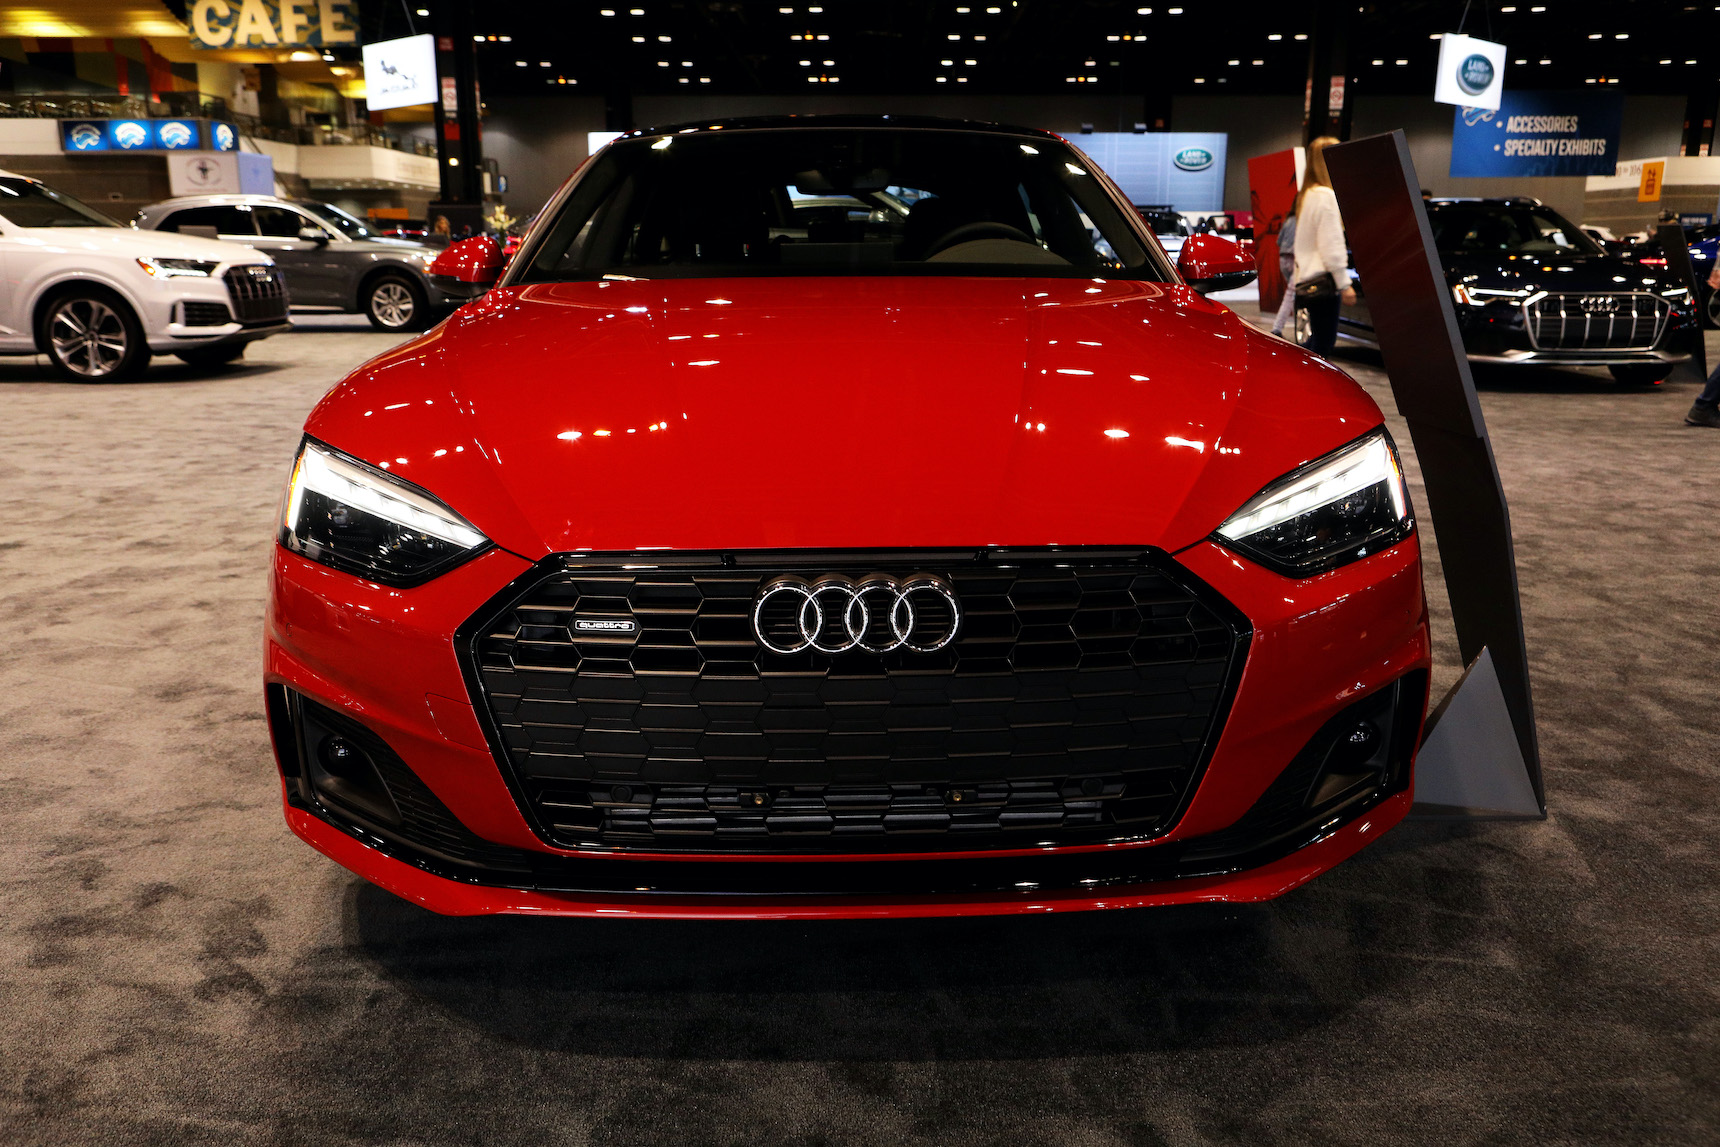 2020 Audi A5 Sportback is on display at the 112th Annual Chicago Auto Show